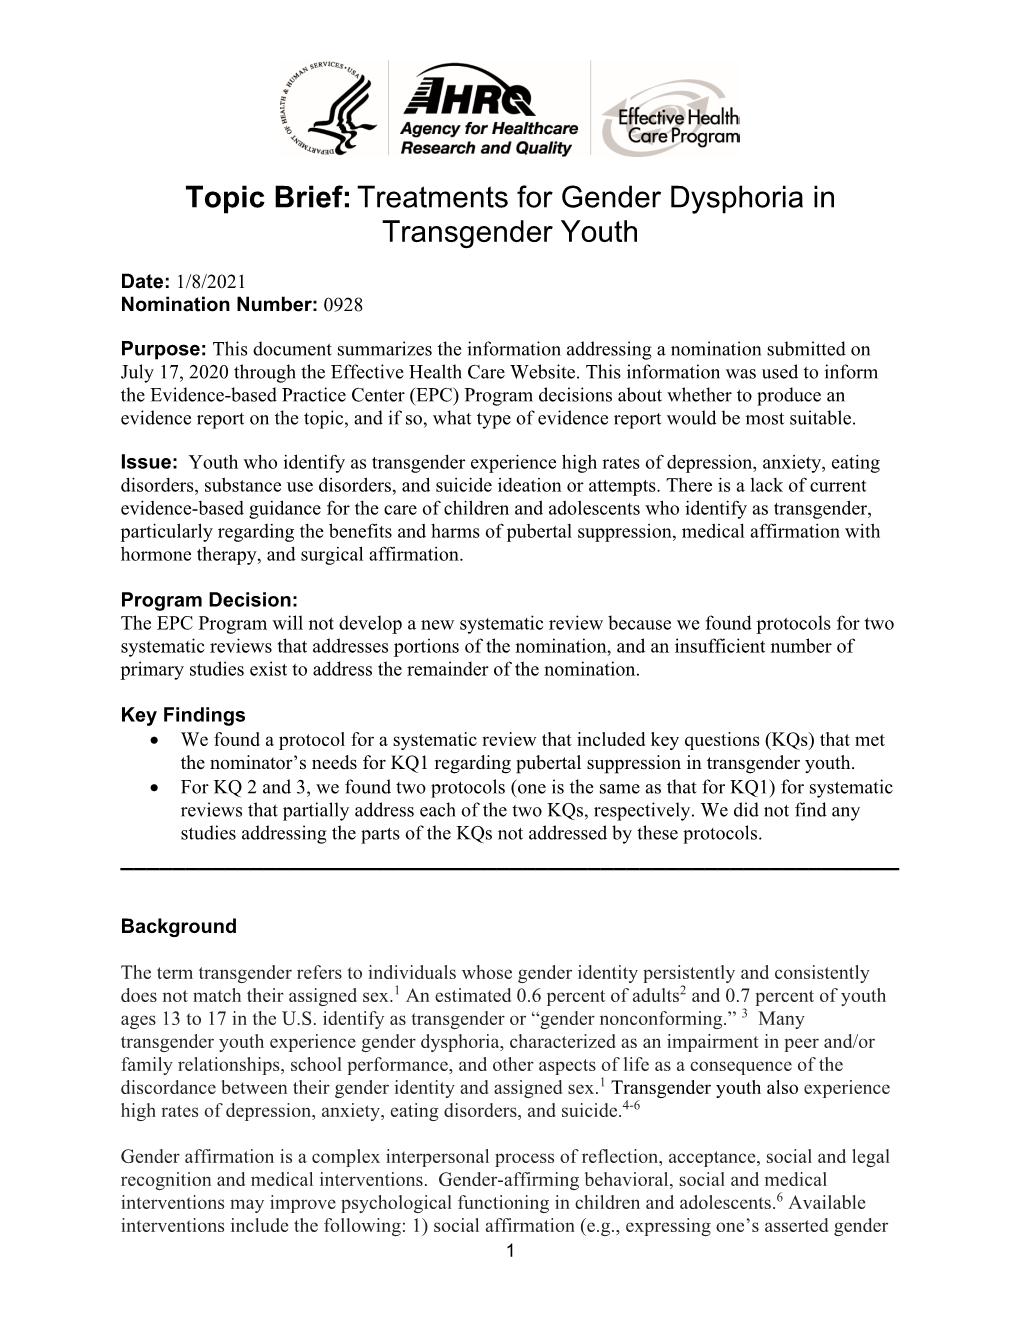 Topic Brief: Treatments for Gender Dysphoria in Transgender Youth